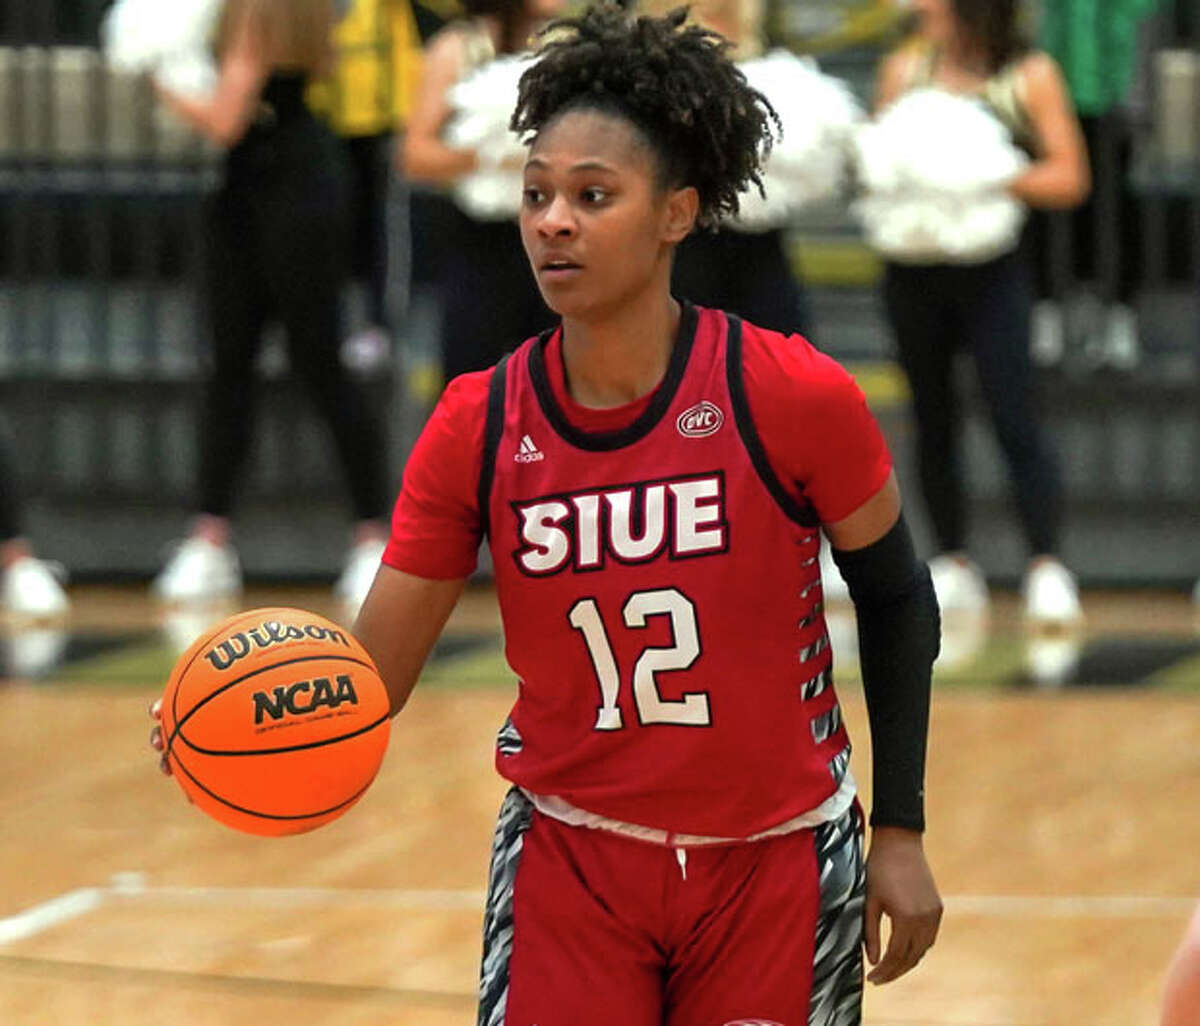 SIUE's Mikayla Kinnard scored 20 points in the Cougars' OVC loss Saturday at Tennessee State.